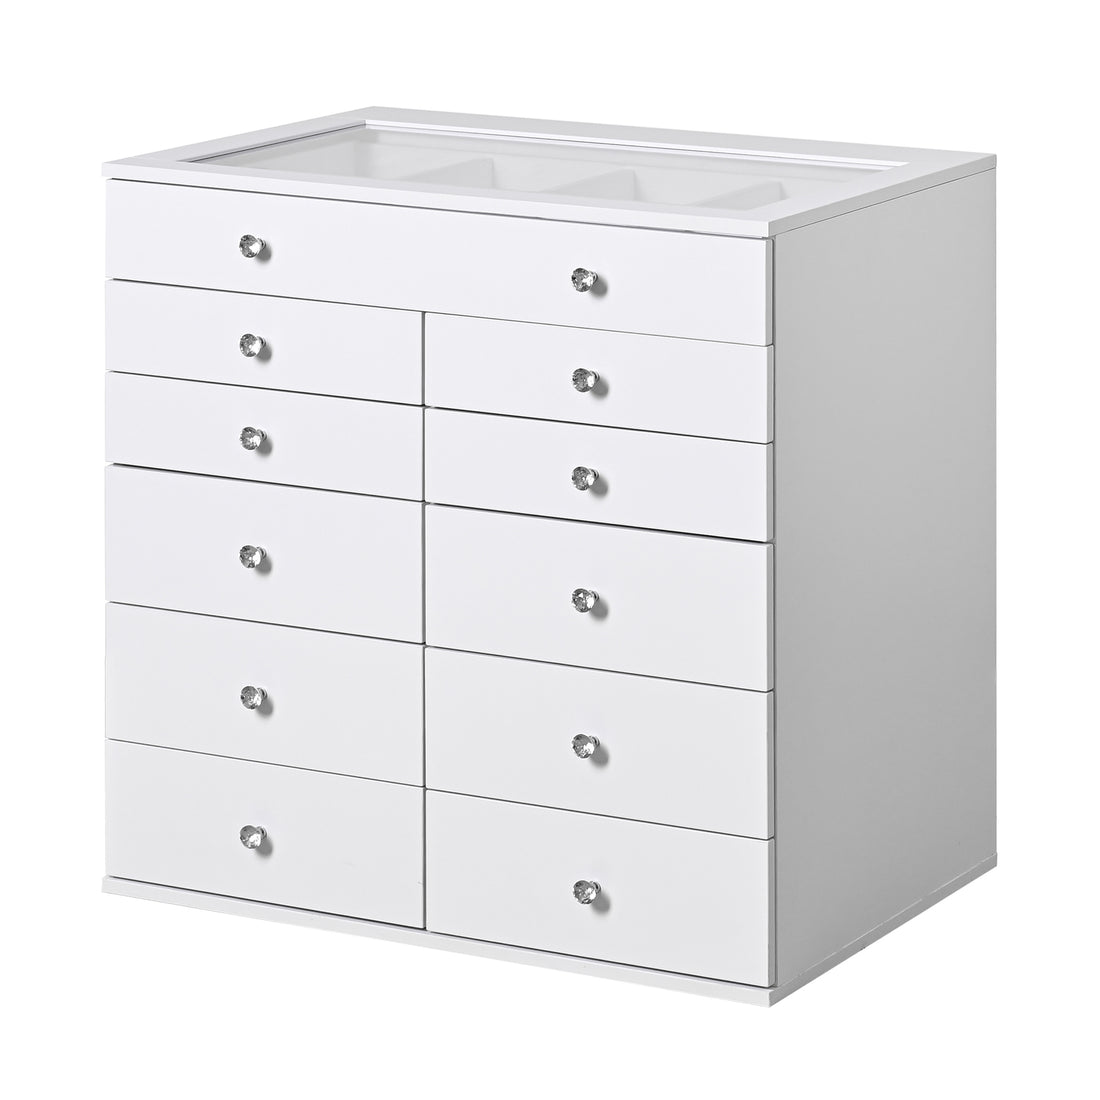 SlayStation White Display Chest with Drawers